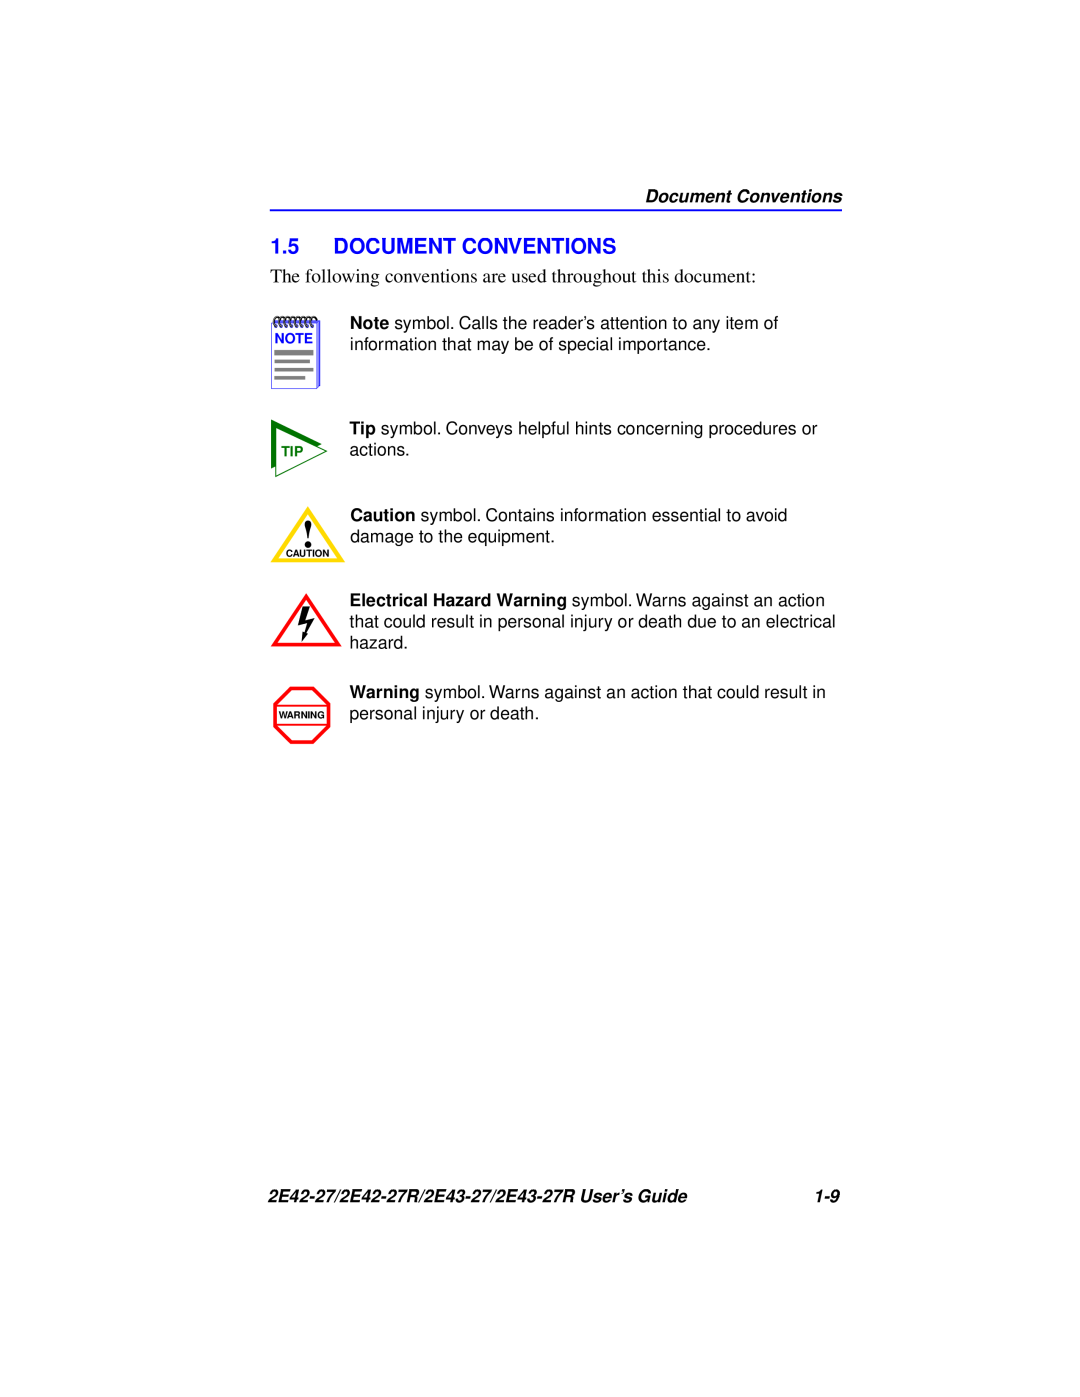 Cabletron Systems 2E42-27, 2E43-27 manual Document Conventions, The following conventions are used throughout this document 